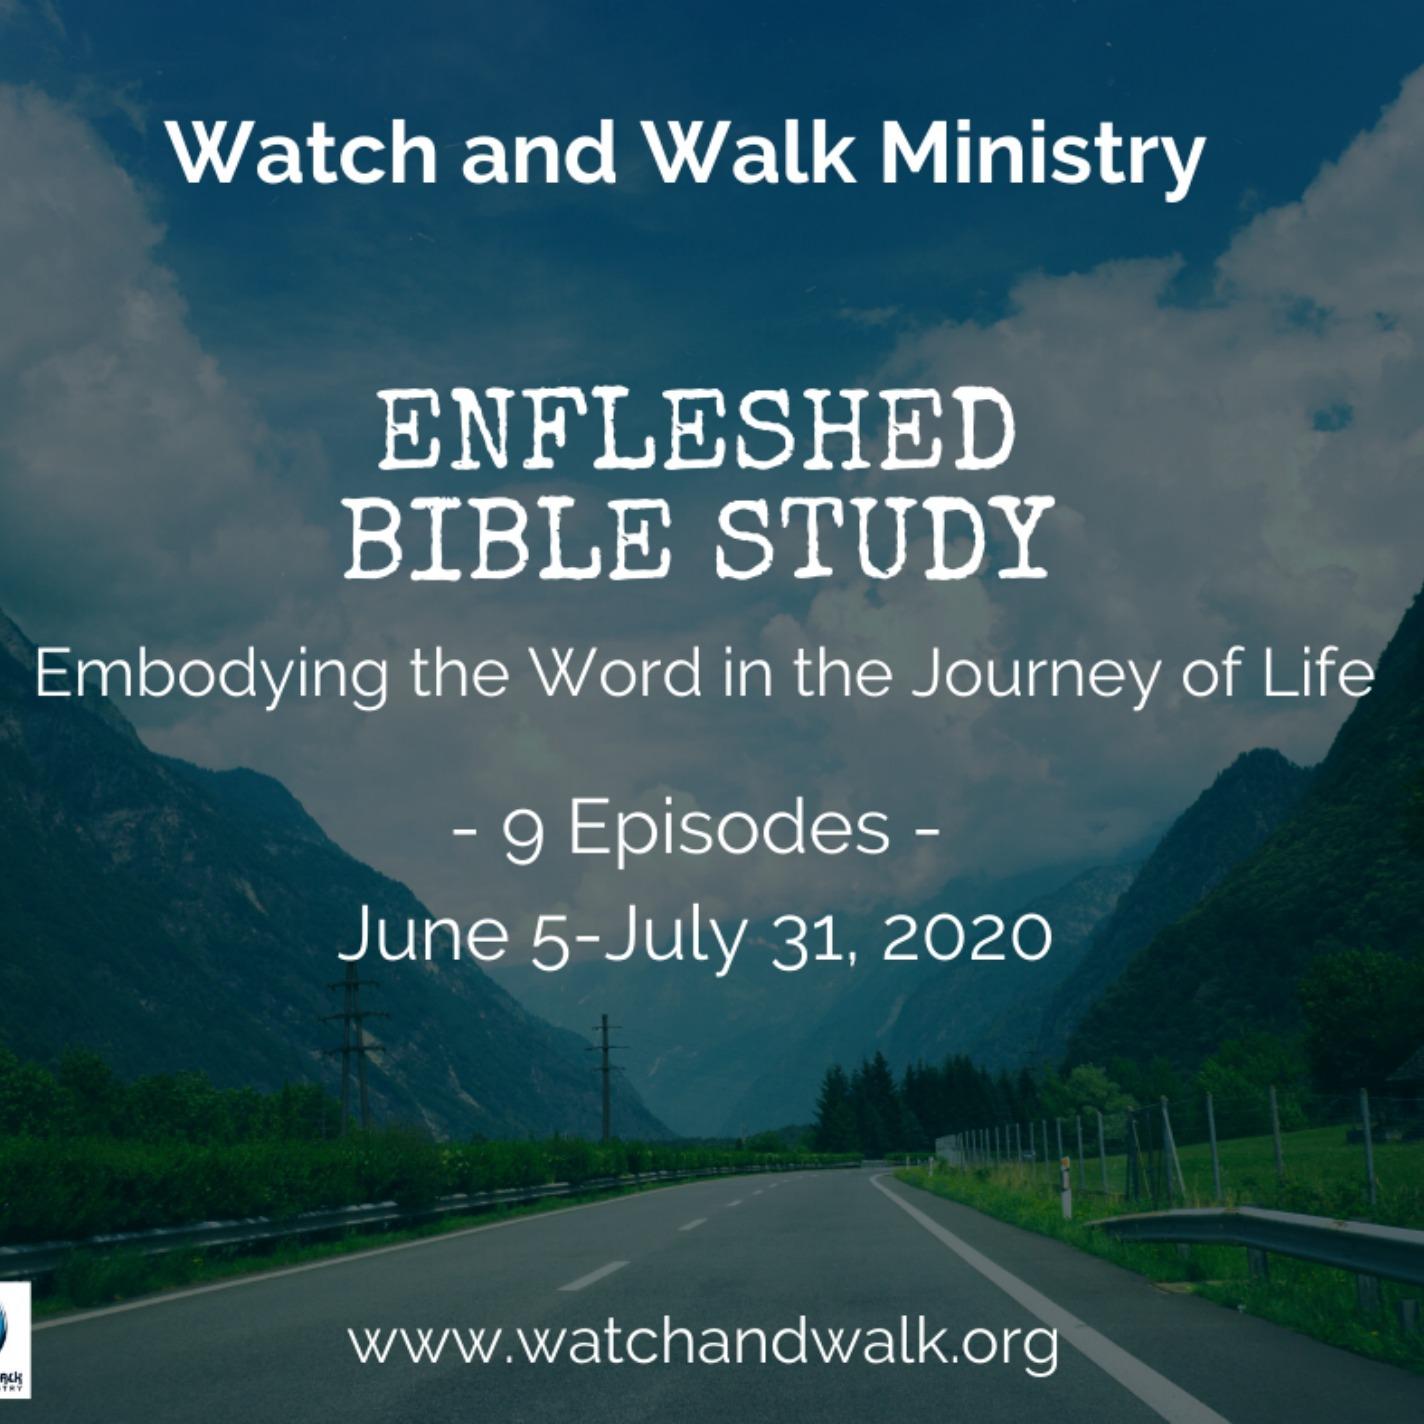 Enfleshed Bible Study by Watch & Walk